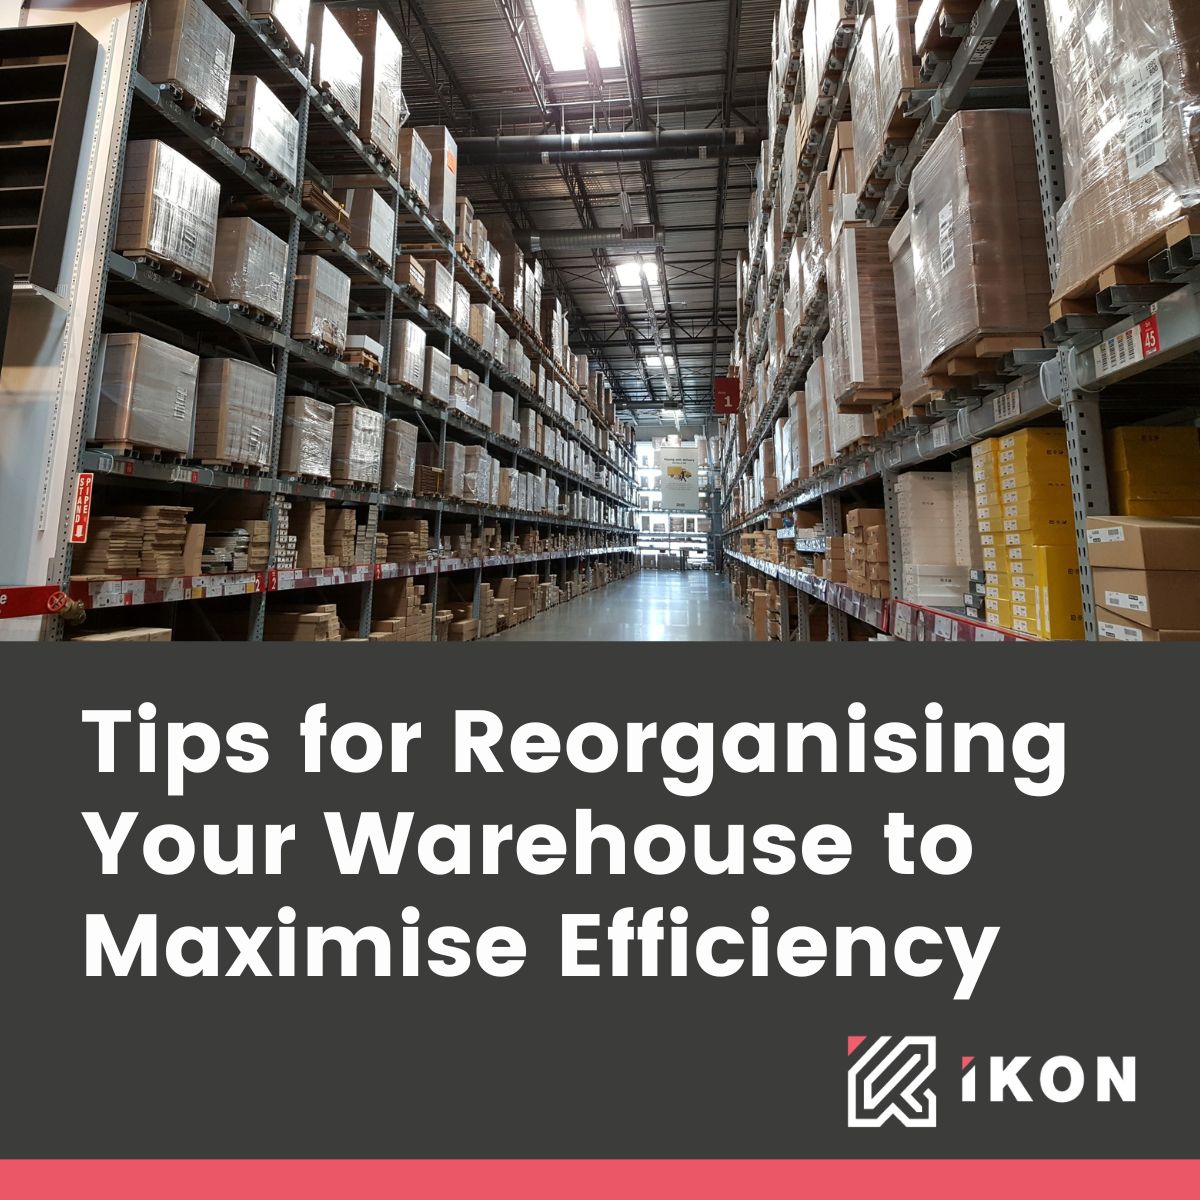 TIPS FOR REORGANISING YOUR WAREHOUSE TO MAXIMISE EFFICIENCY